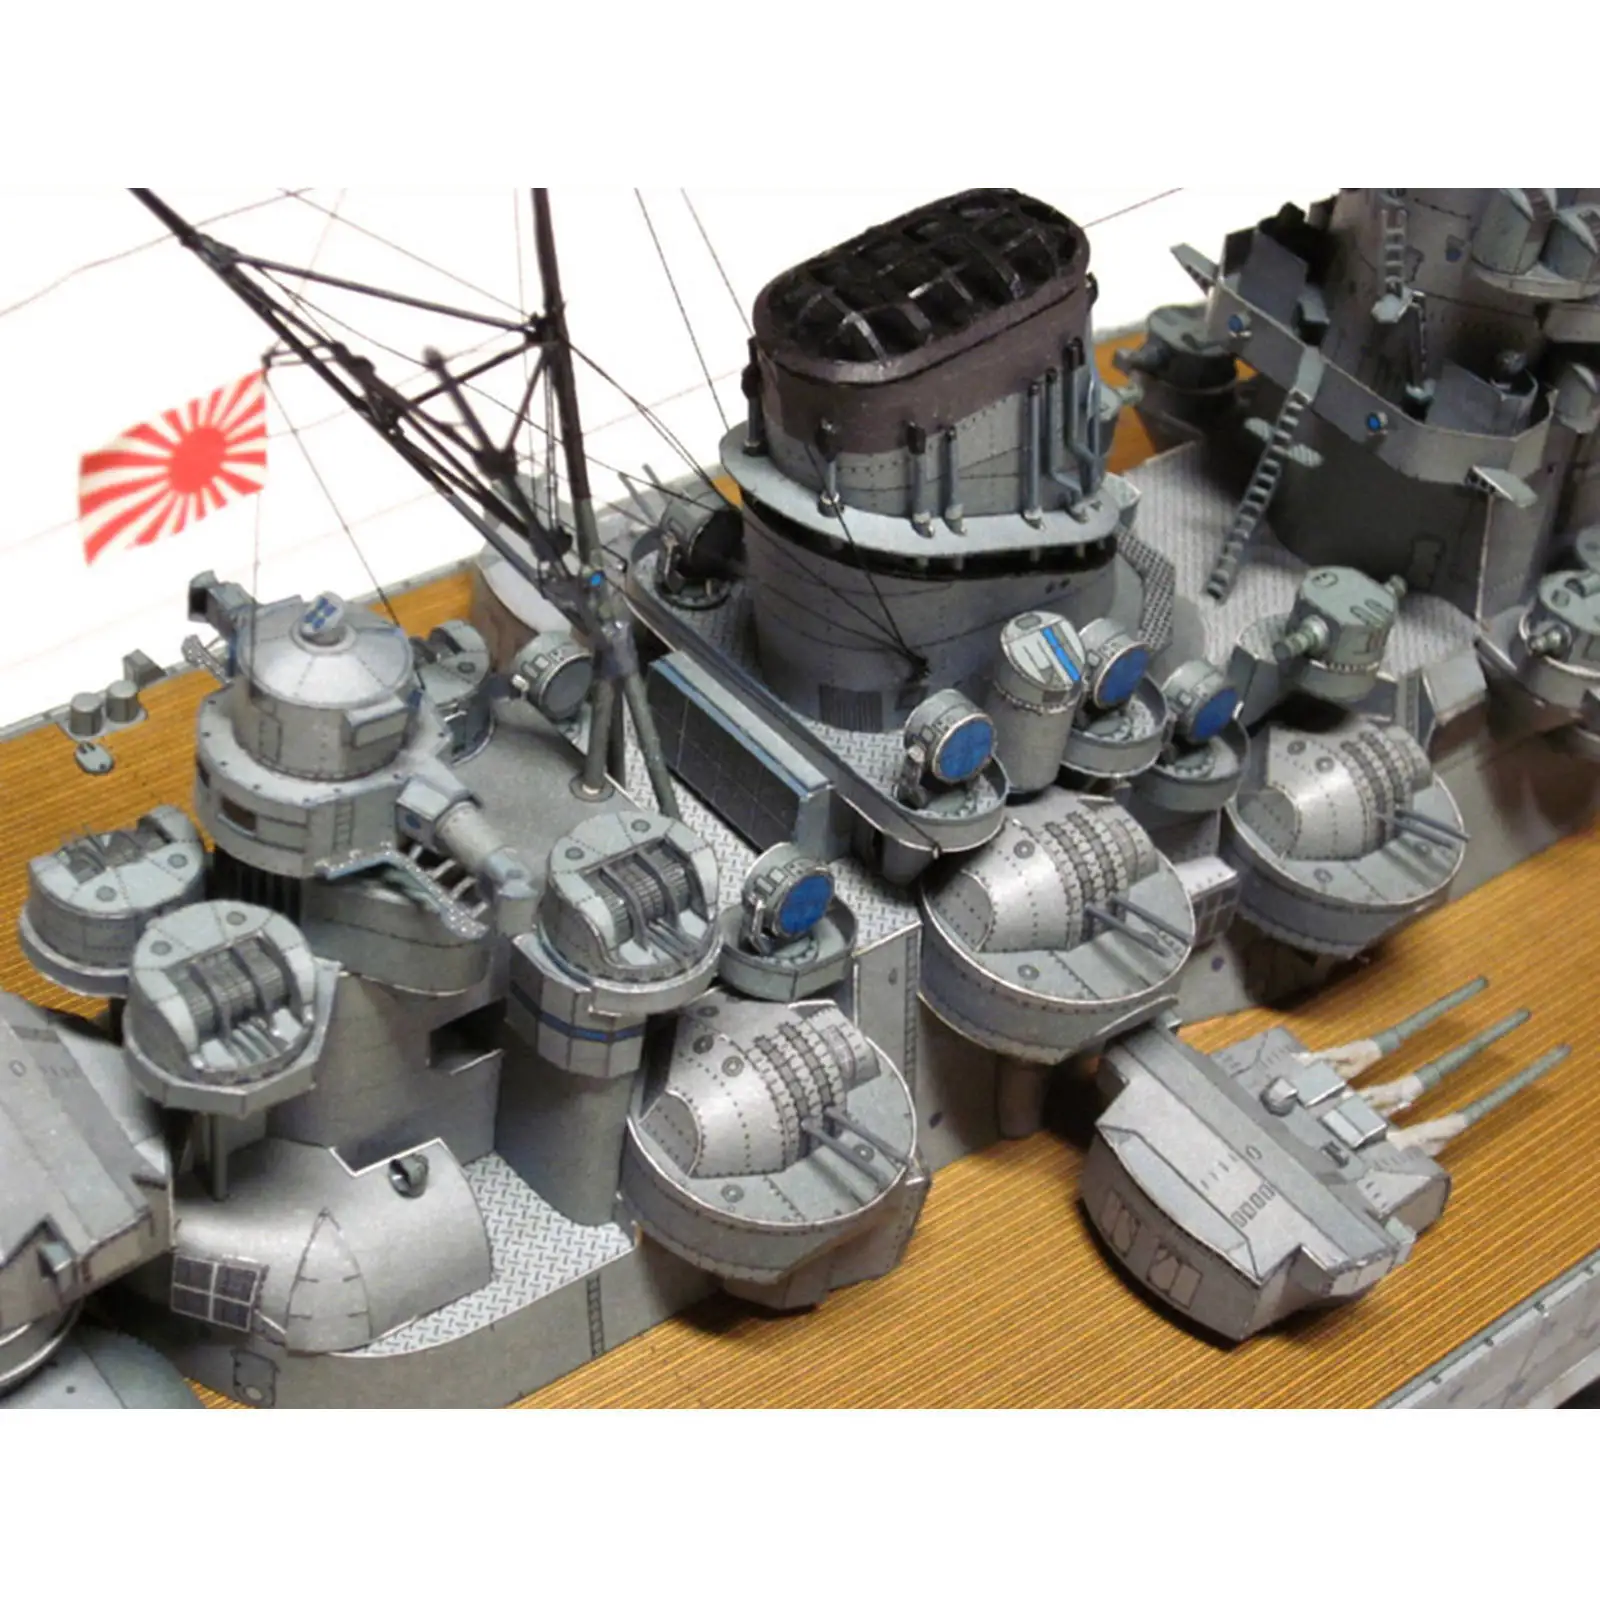 3D Japanese Yamato Navy Ship Puzzle Paper Model Kits Game Papercraft Lovers